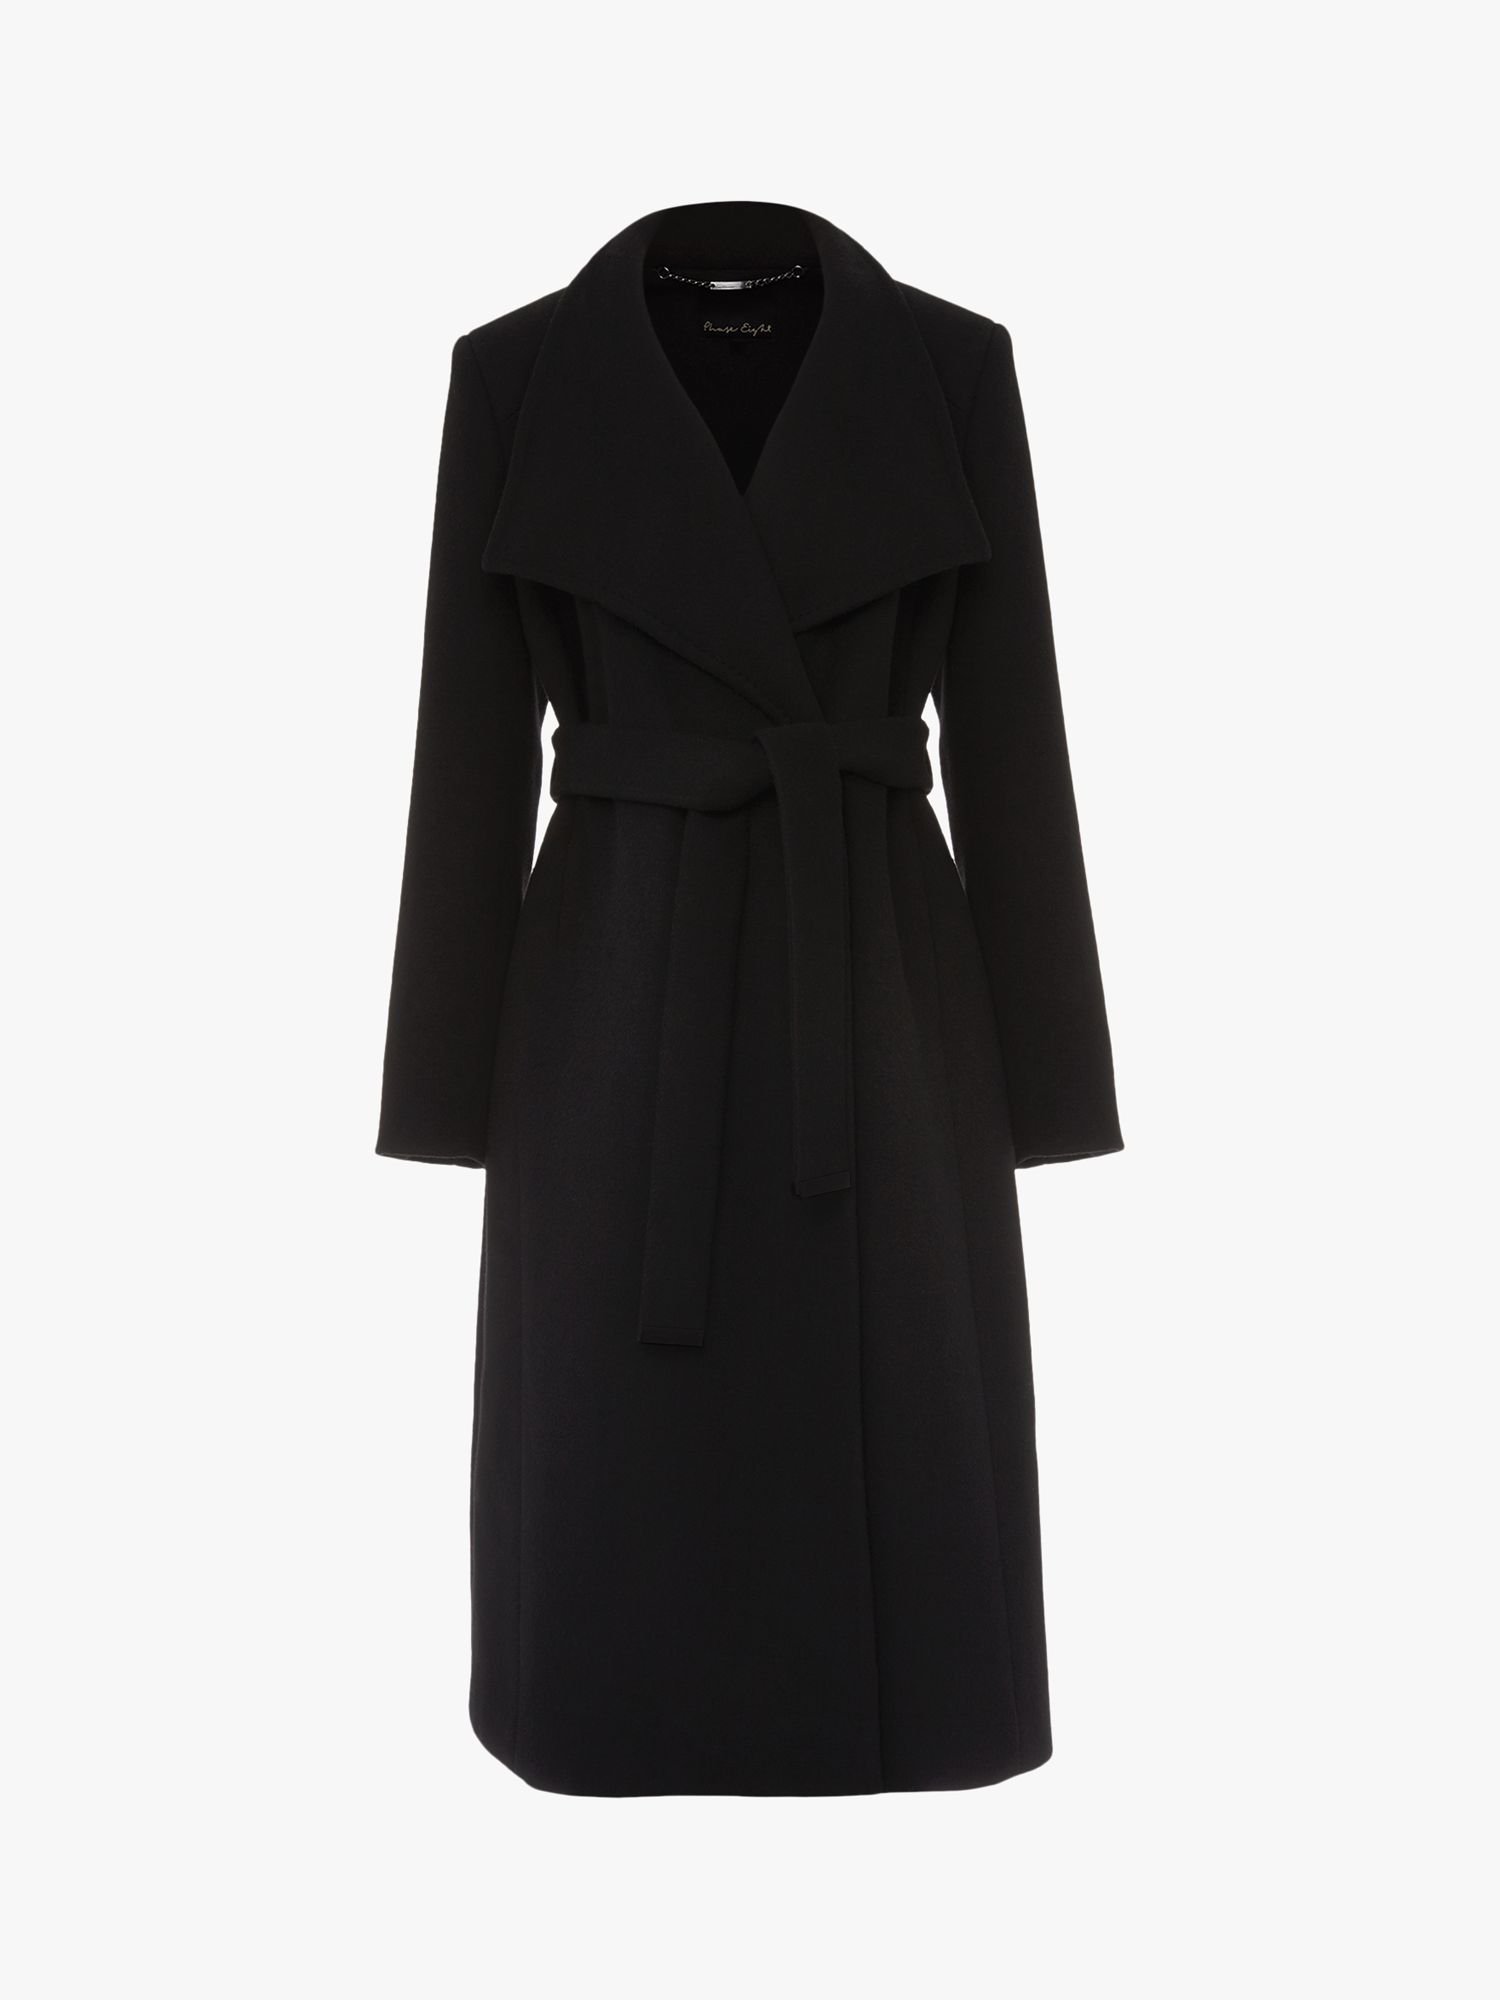 Phase Eight Thea Belted Wool Blend Coat, Black at John Lewis & Partners